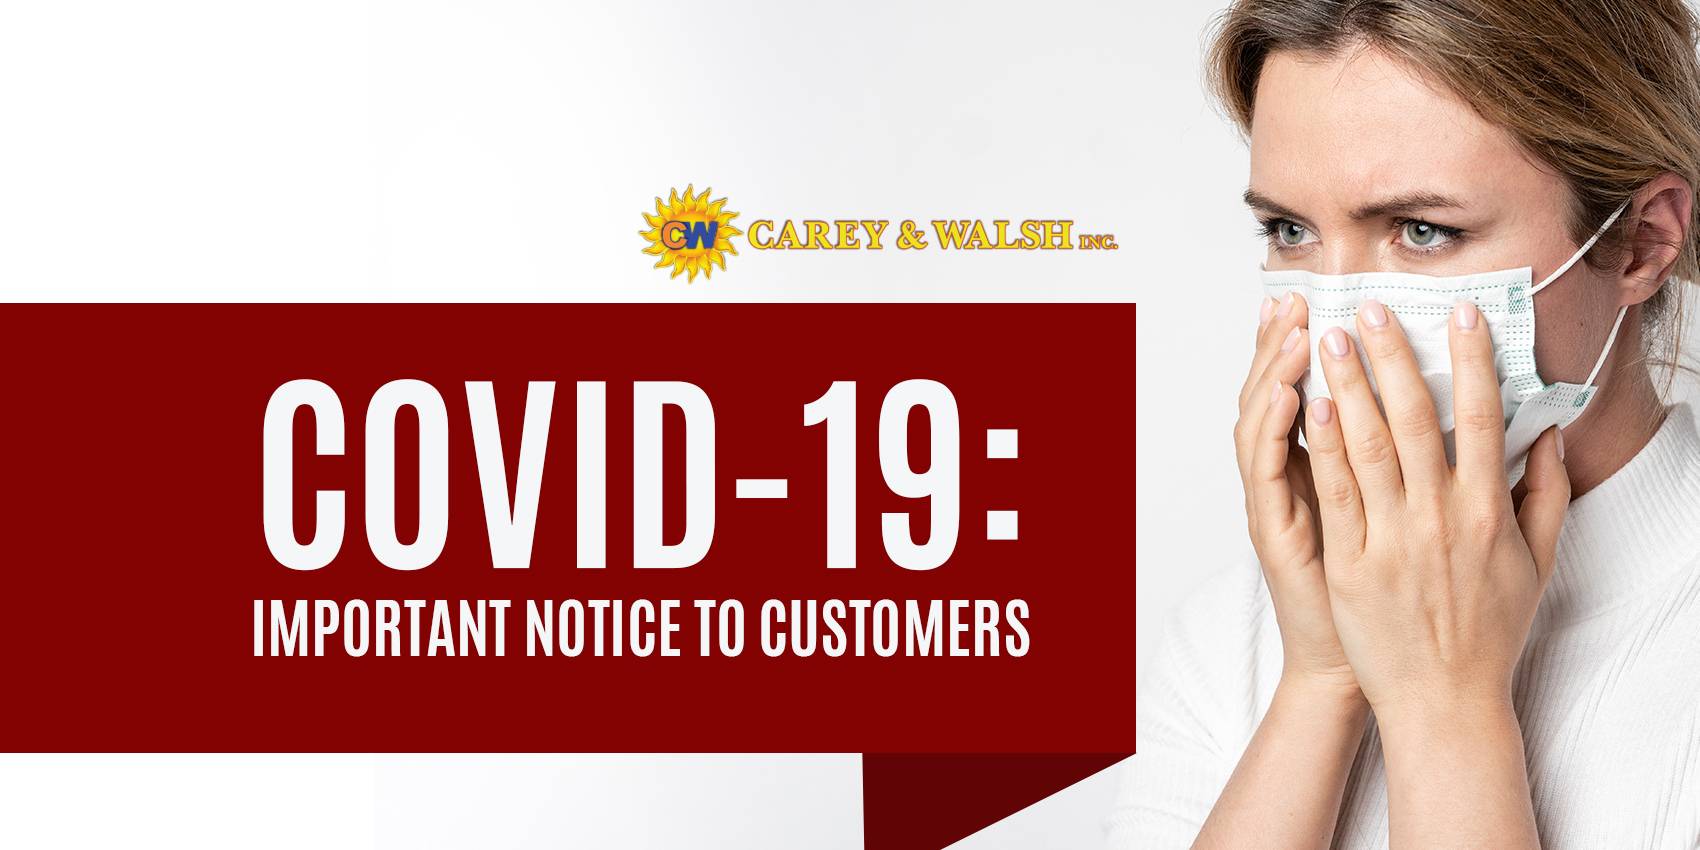 COVID-19: IMPORTANT NOTICE TO CUSTOMERS